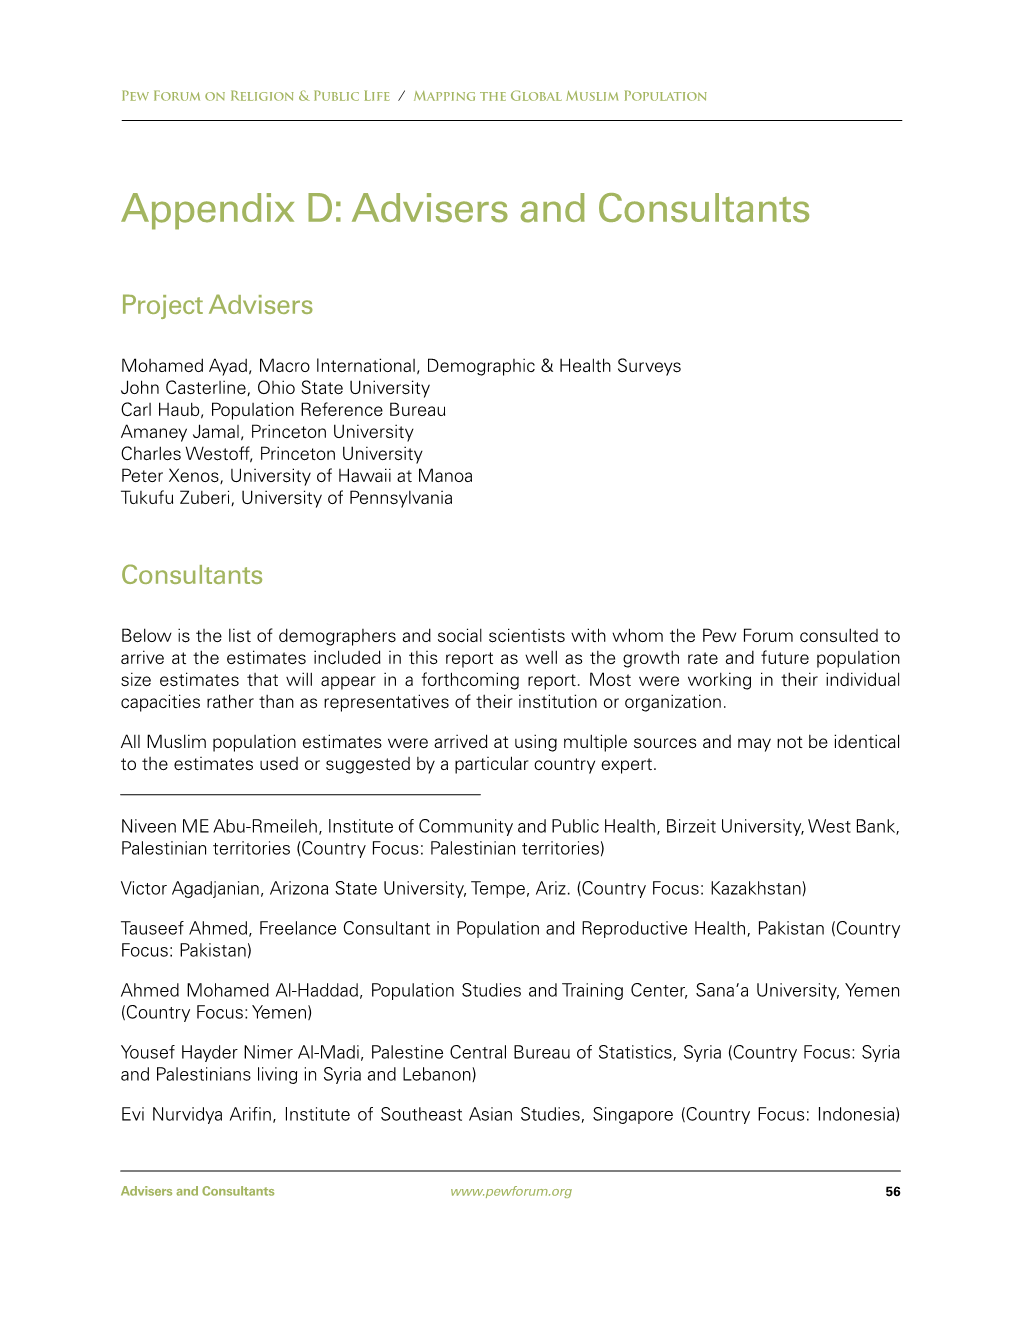 Advisers and Consultants